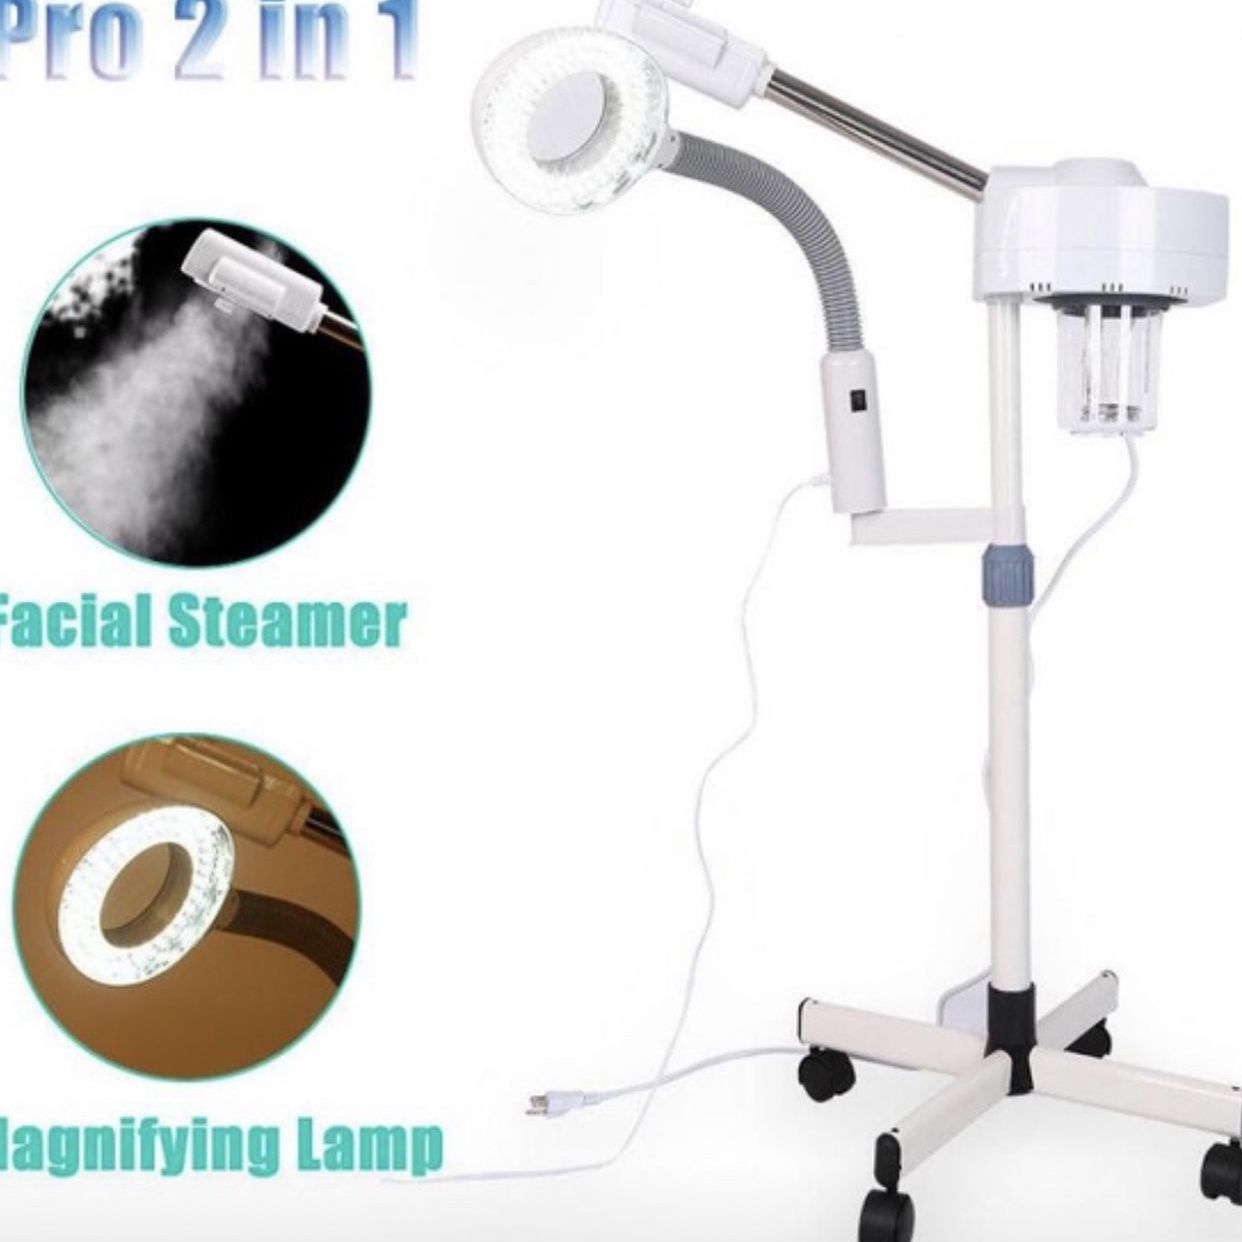 Facial Steamer And Magnifying Glass